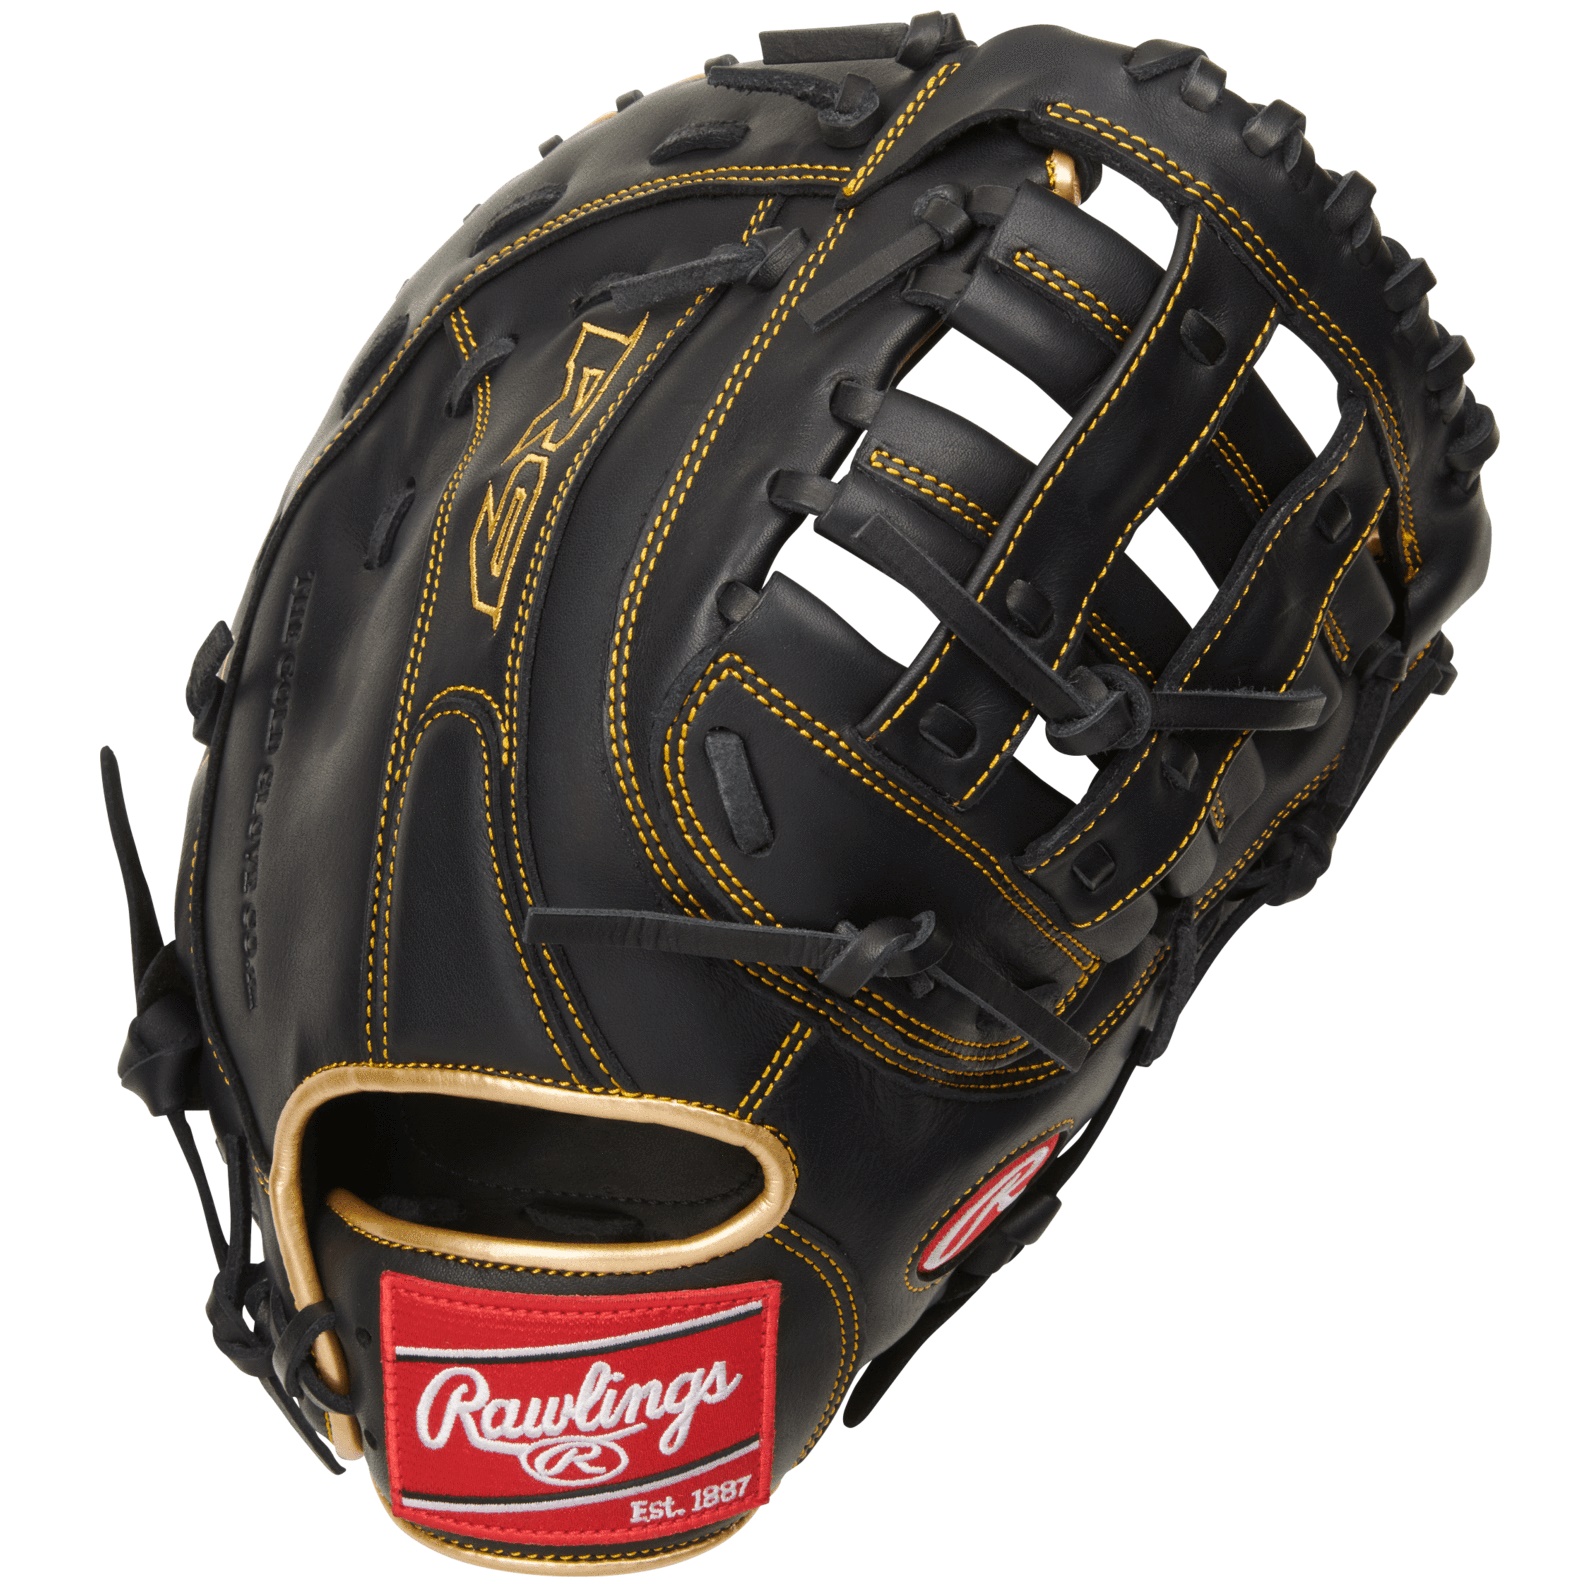 The 2021 R9 series 12.5-inch first base mitt was crafted with up-and-coming athletes in mind. Its modified pro-H web and deep pocket are sure to help young stars shine every inning out. Thanks to its soft, durable leather athletes will gain confidence knowing they can trust it to hold up on even the hardest hit line-drives. As a result, they'll play better and help their team win more games. In addition, the R9's padded thumb sleeve and finger-back liners, and reinforced palm pad provide athletes with more protection than other similarly-priced gloves. If you need to aid your range with a reliable glove at an affordable price, then you've found your next gamer. Don't keep worrying about stingers, get your own R9 H-web first base mitt today, and shut down your competition. Shop now!  Sport:   Baseball  Back:   Conventional  Player Break-In:   20  Fit:   Standard  Level:   Adult  Lining:   Padded fingerback liners  Padding:   Reinforced palm pad  Series:   R9  Shell:   Soft, durable all-leather  Web:   Pro H  Size:   12.5 in  Pattern:   FM18  Age Group:   High School, 14U, 12U, 10U  